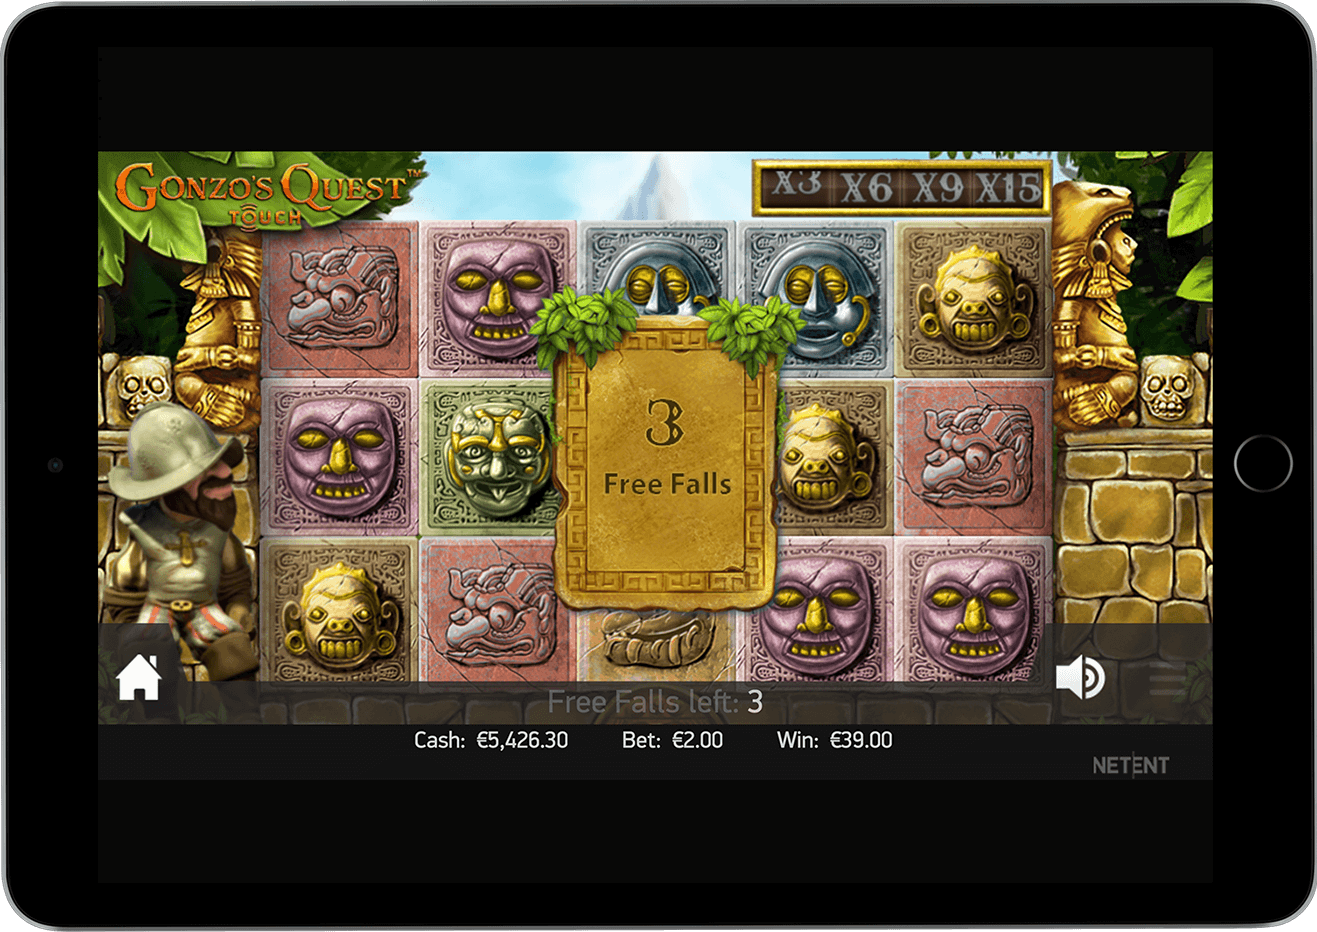 Gonzos Quest slot free spins